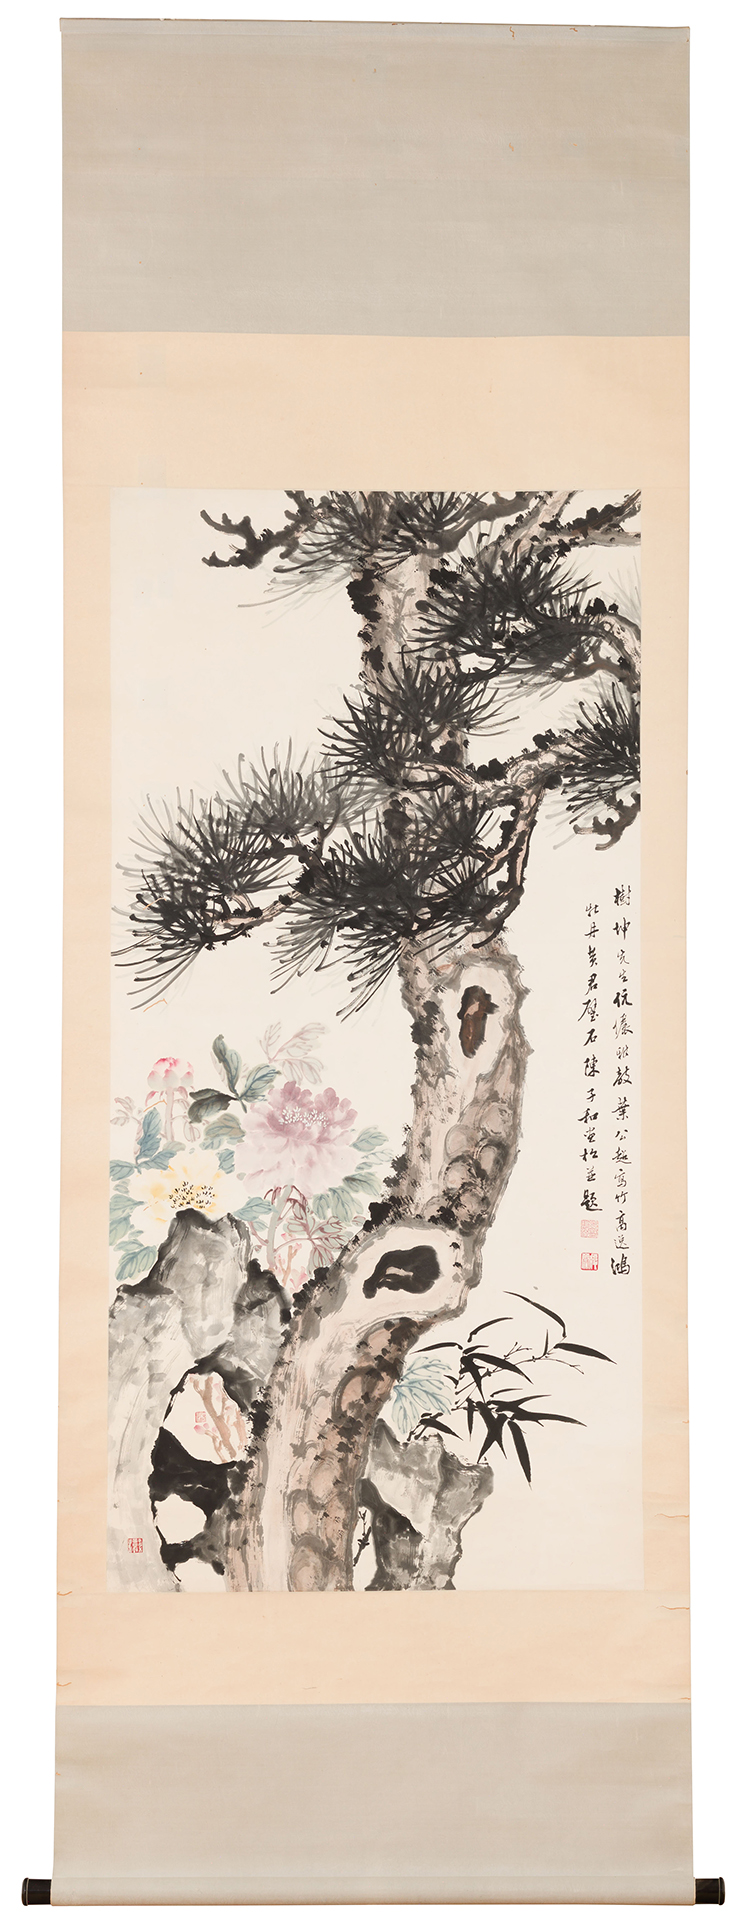 Pine, Bamboo and Rocks with Chen Zihe by Huang Junbi